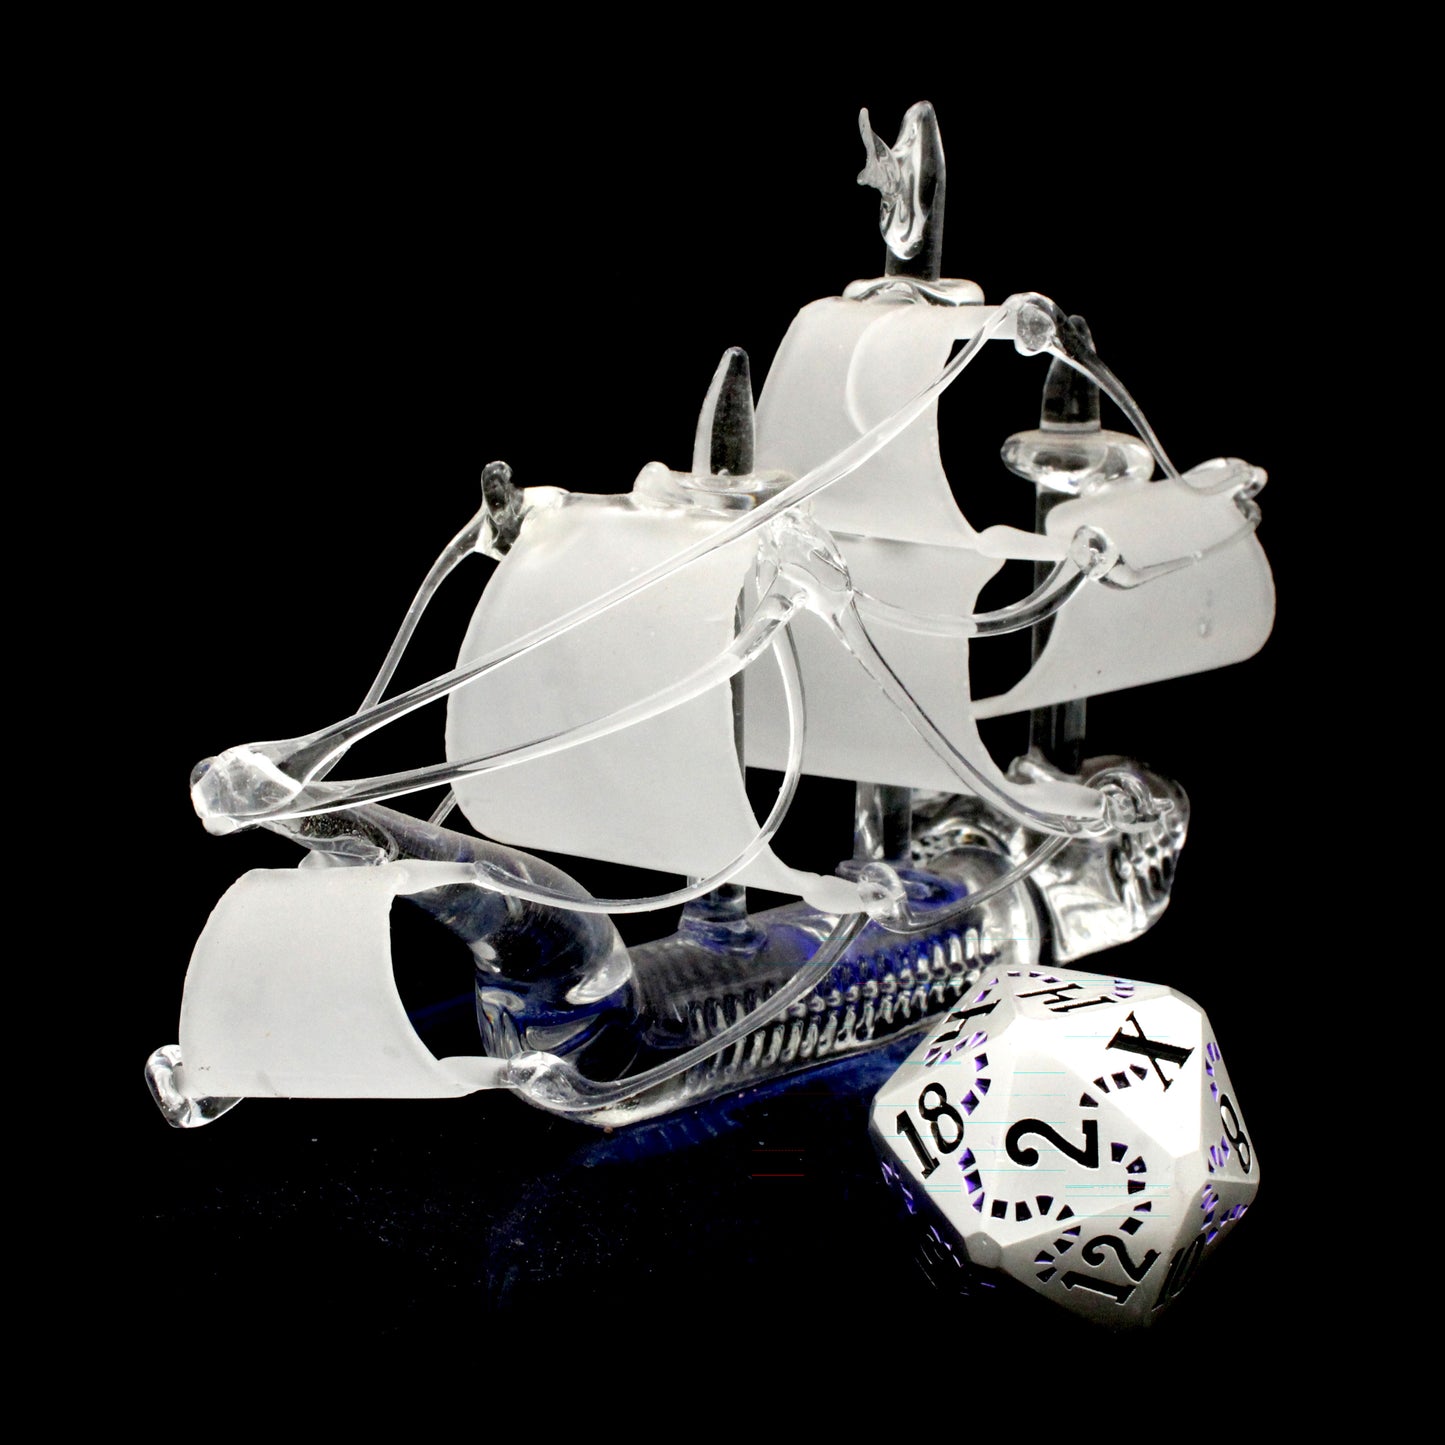 Last Breath is a Dice Envy Exclusive 8-piece set of pearled white metal dice with a treasure map engraving inked in purple and black. It is part of the Pirate Dice collection.